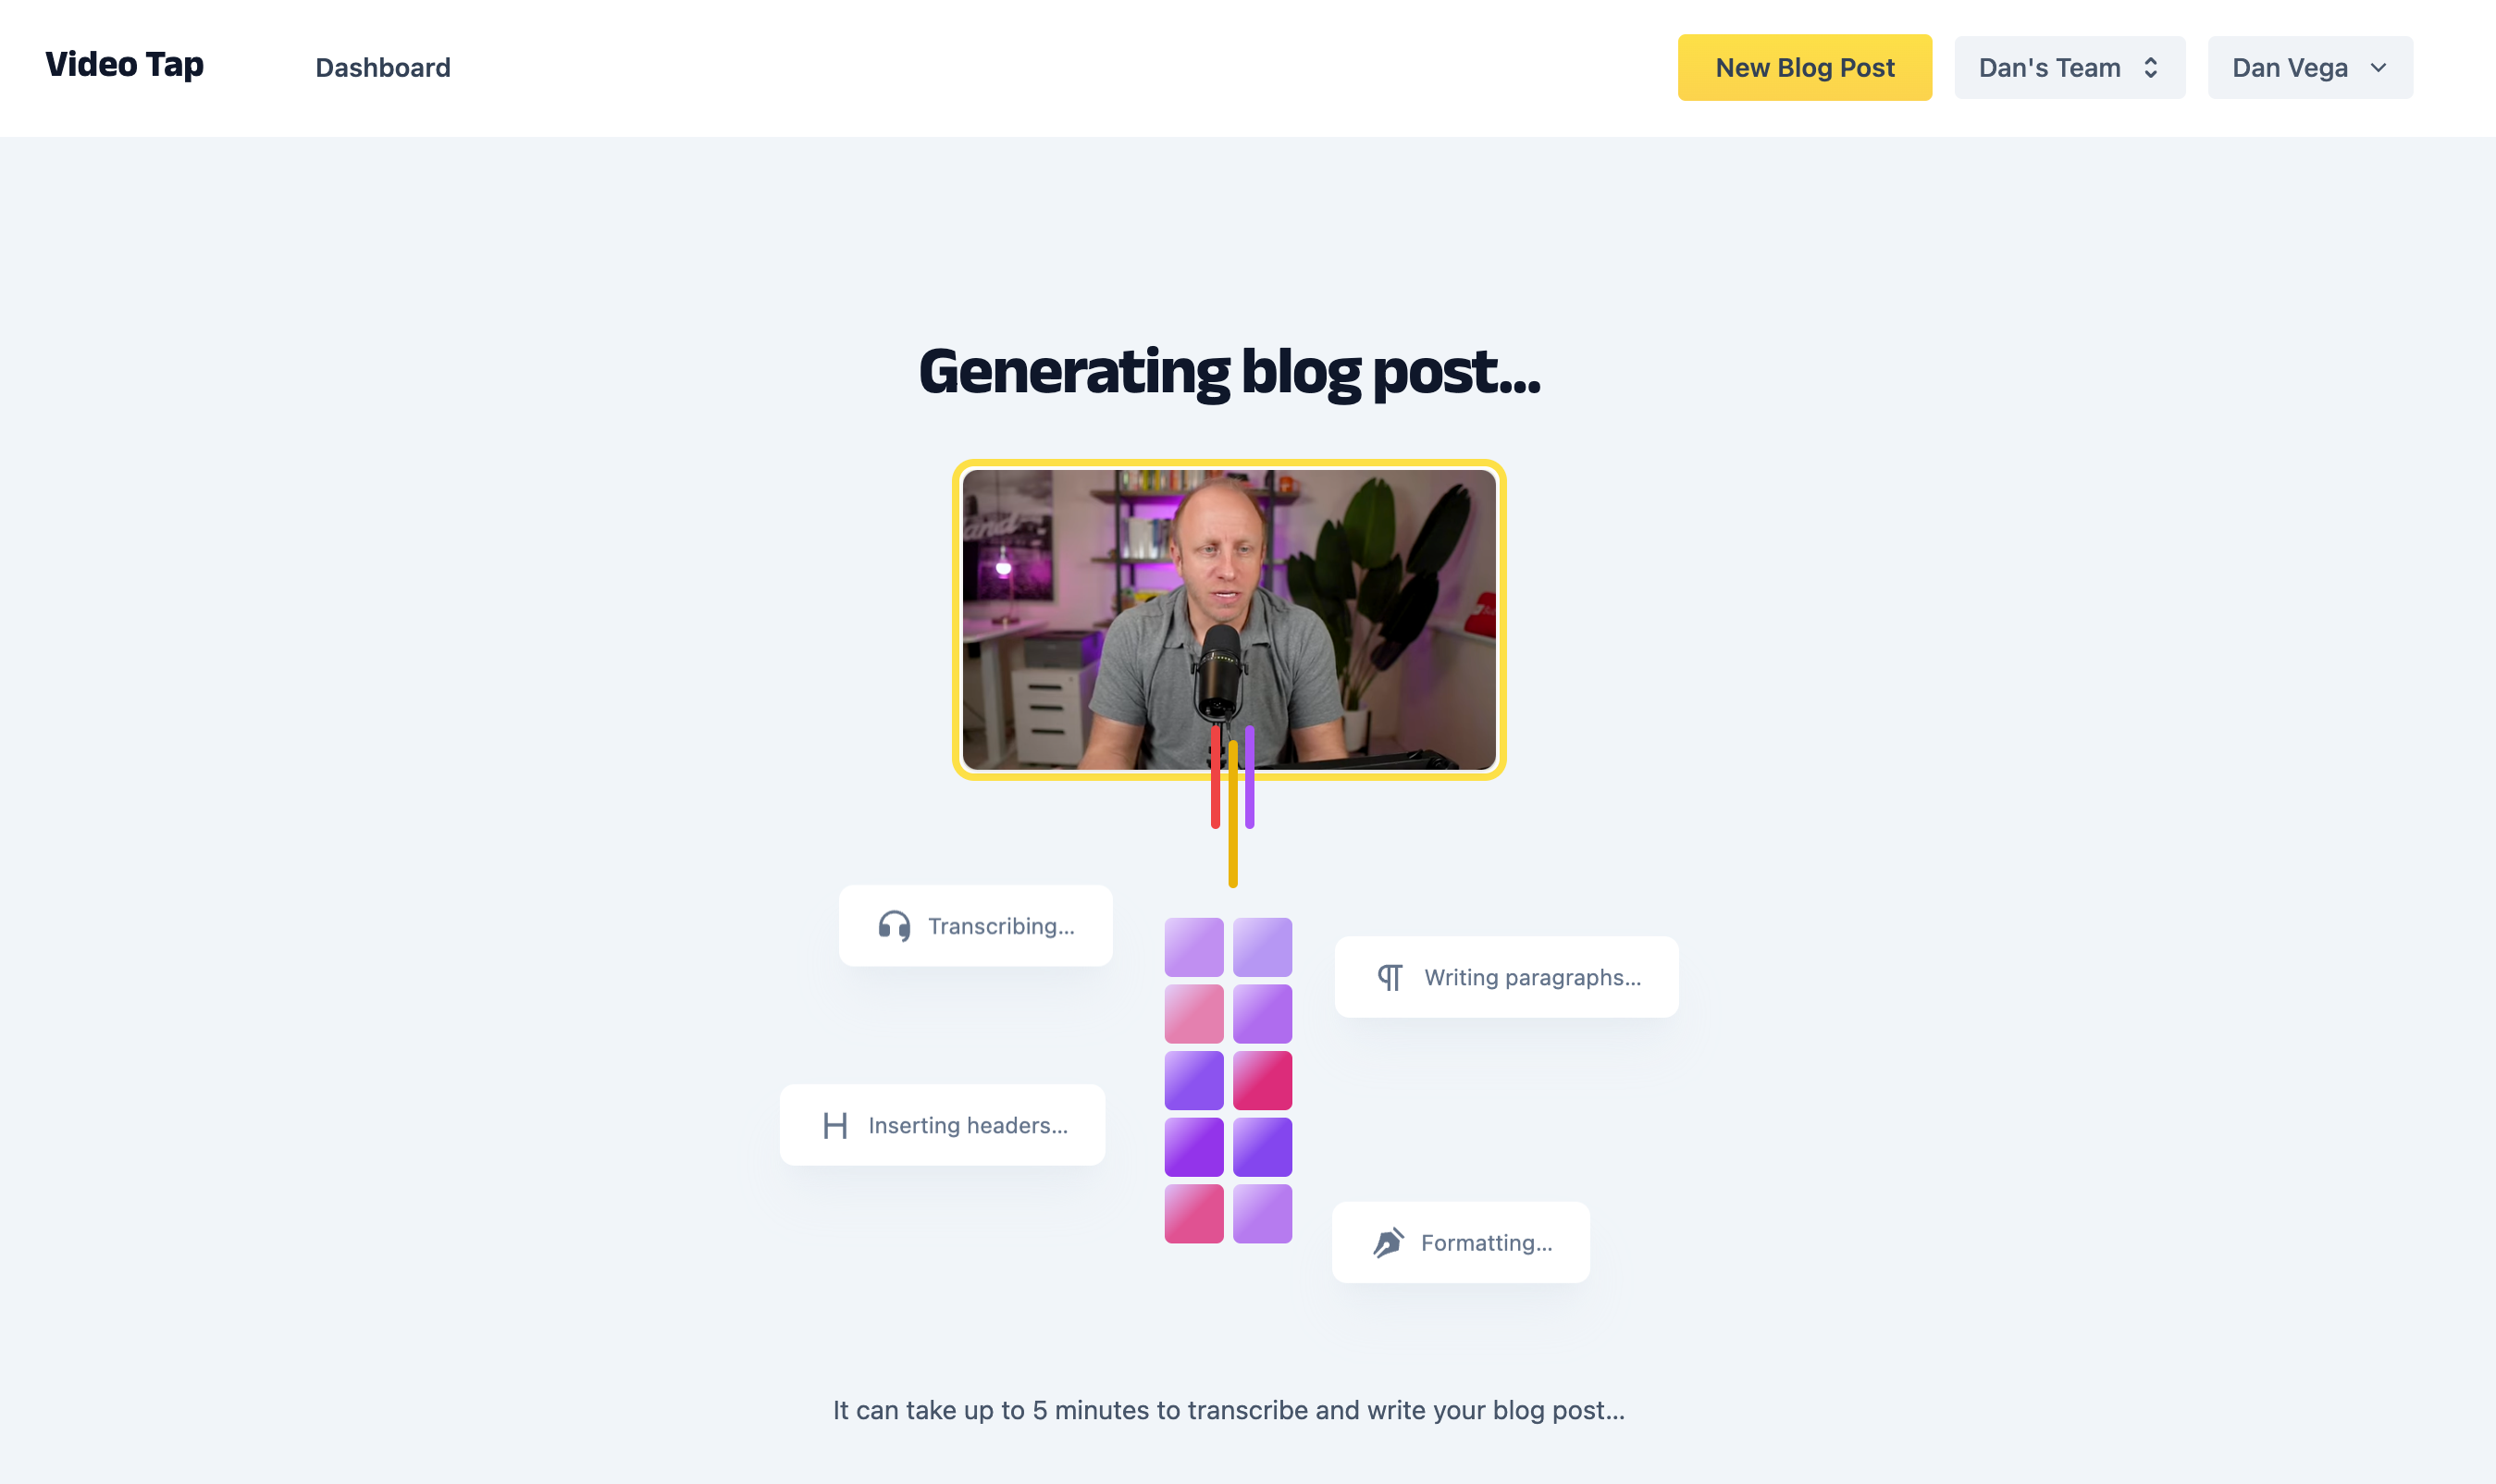 Generating a new blog post with VideoTap